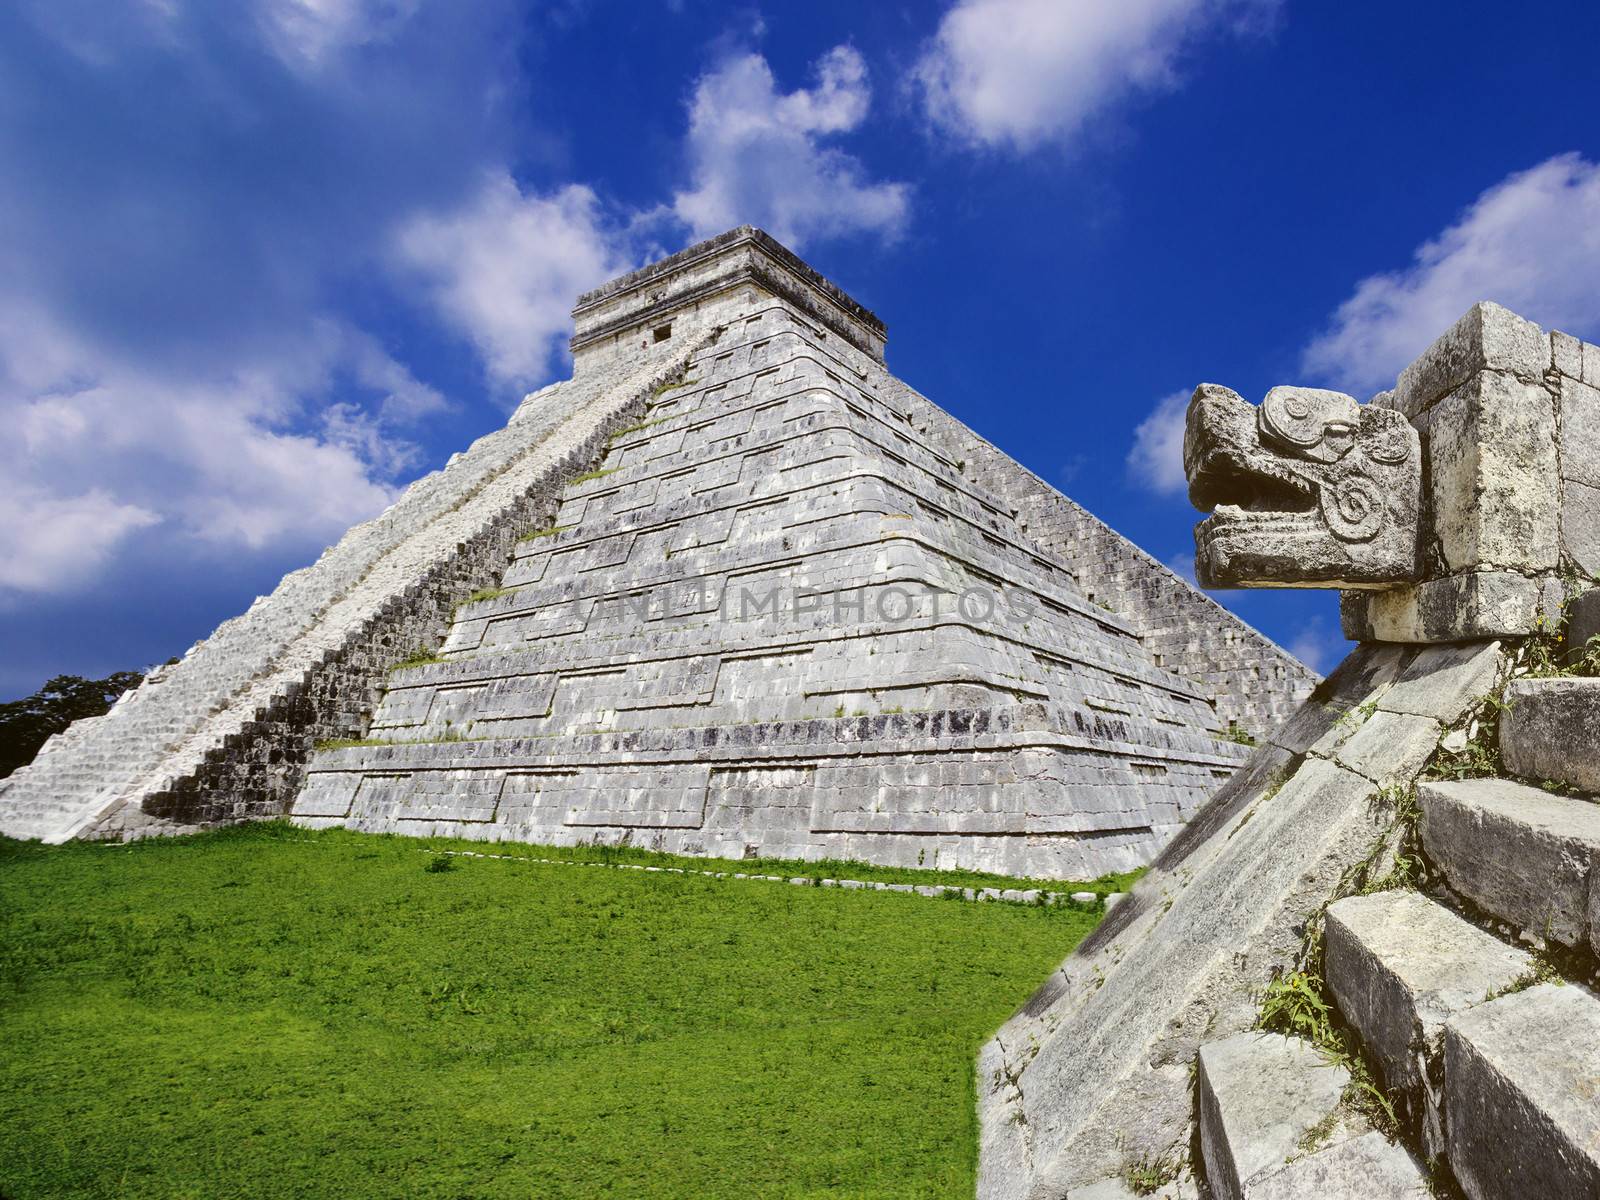 Mayan pyramid at Chichen Itza with stone snake in the foreground. Yucatan,Mexico